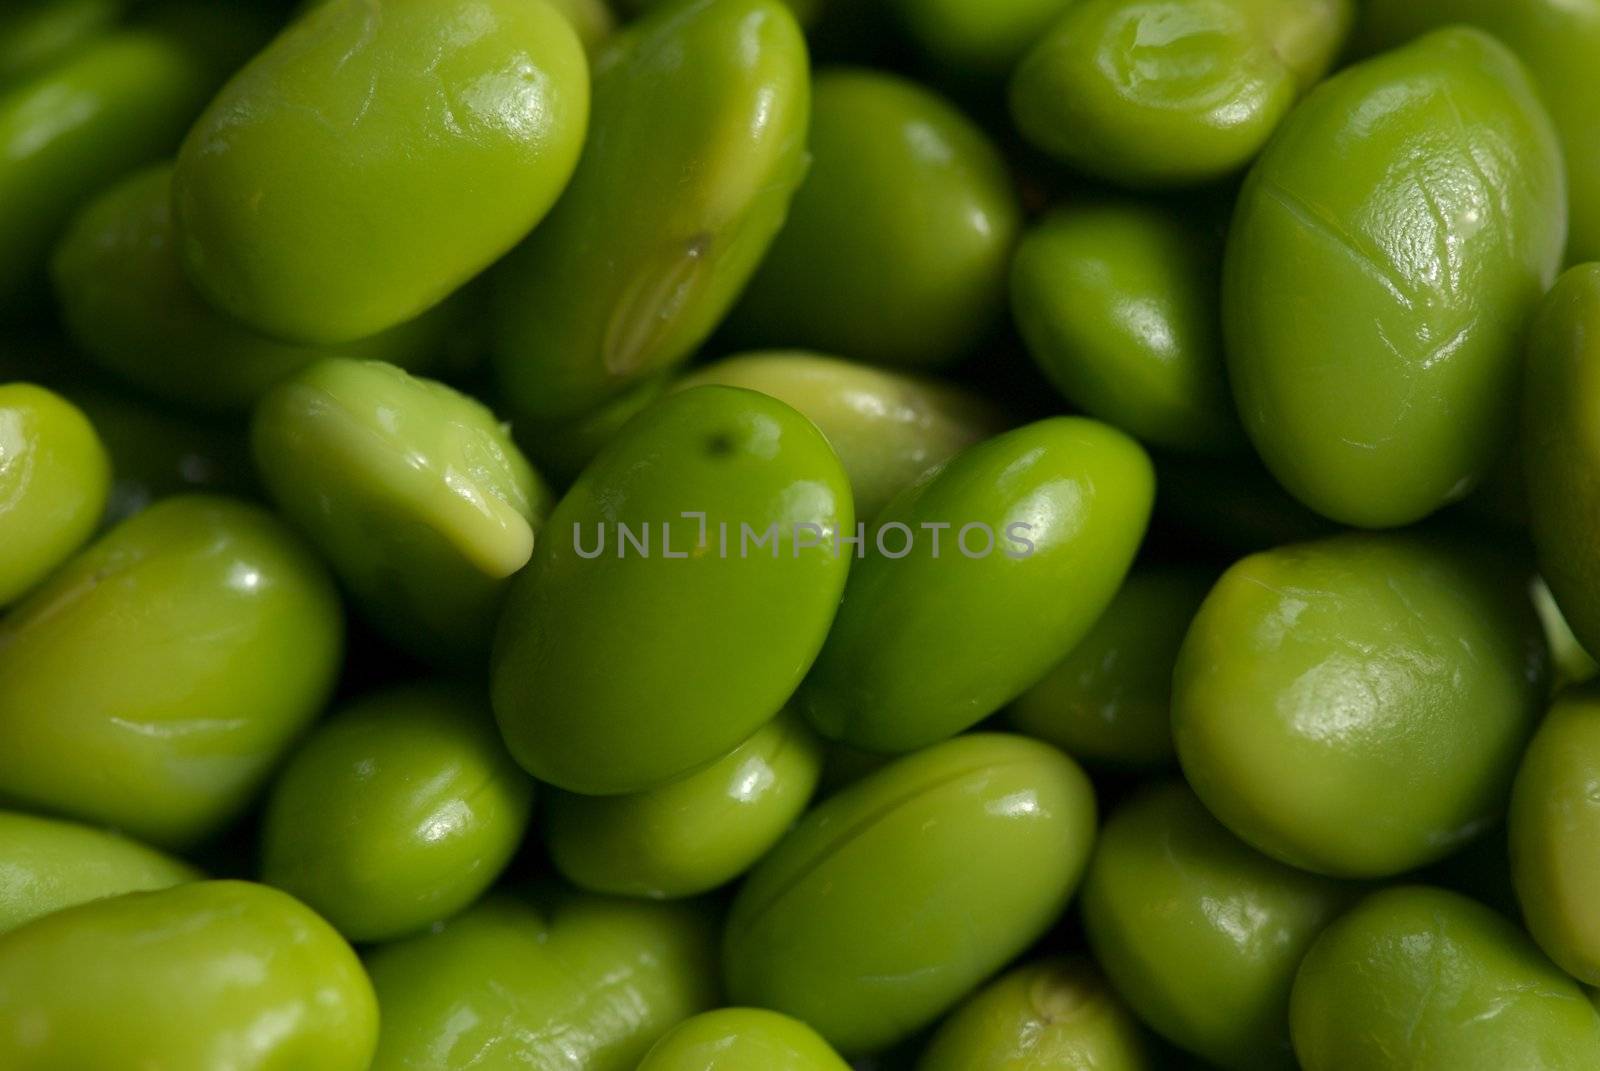 Image of bright green edamame beans